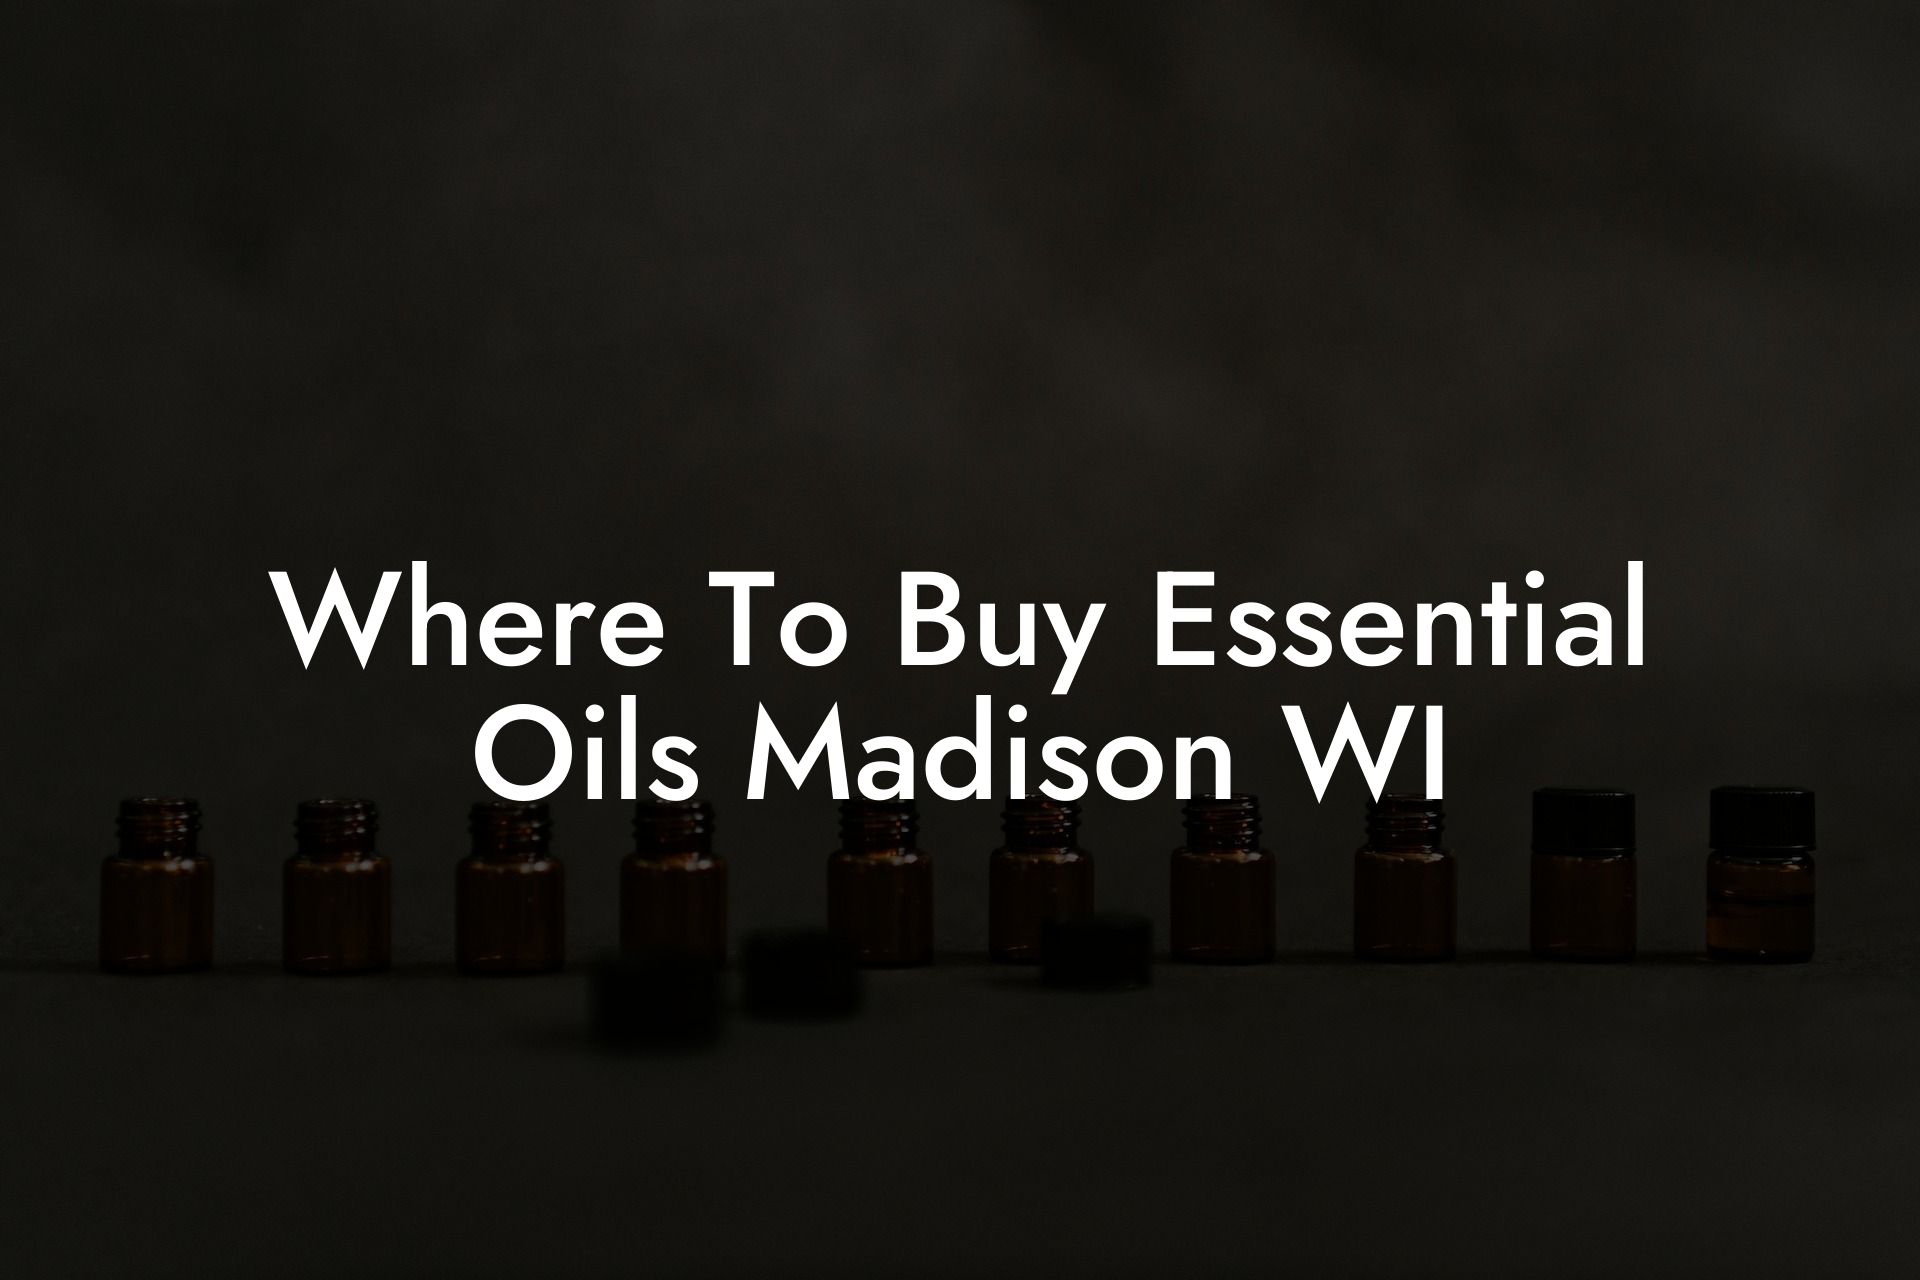 Where To Buy Essential Oils Madison WI